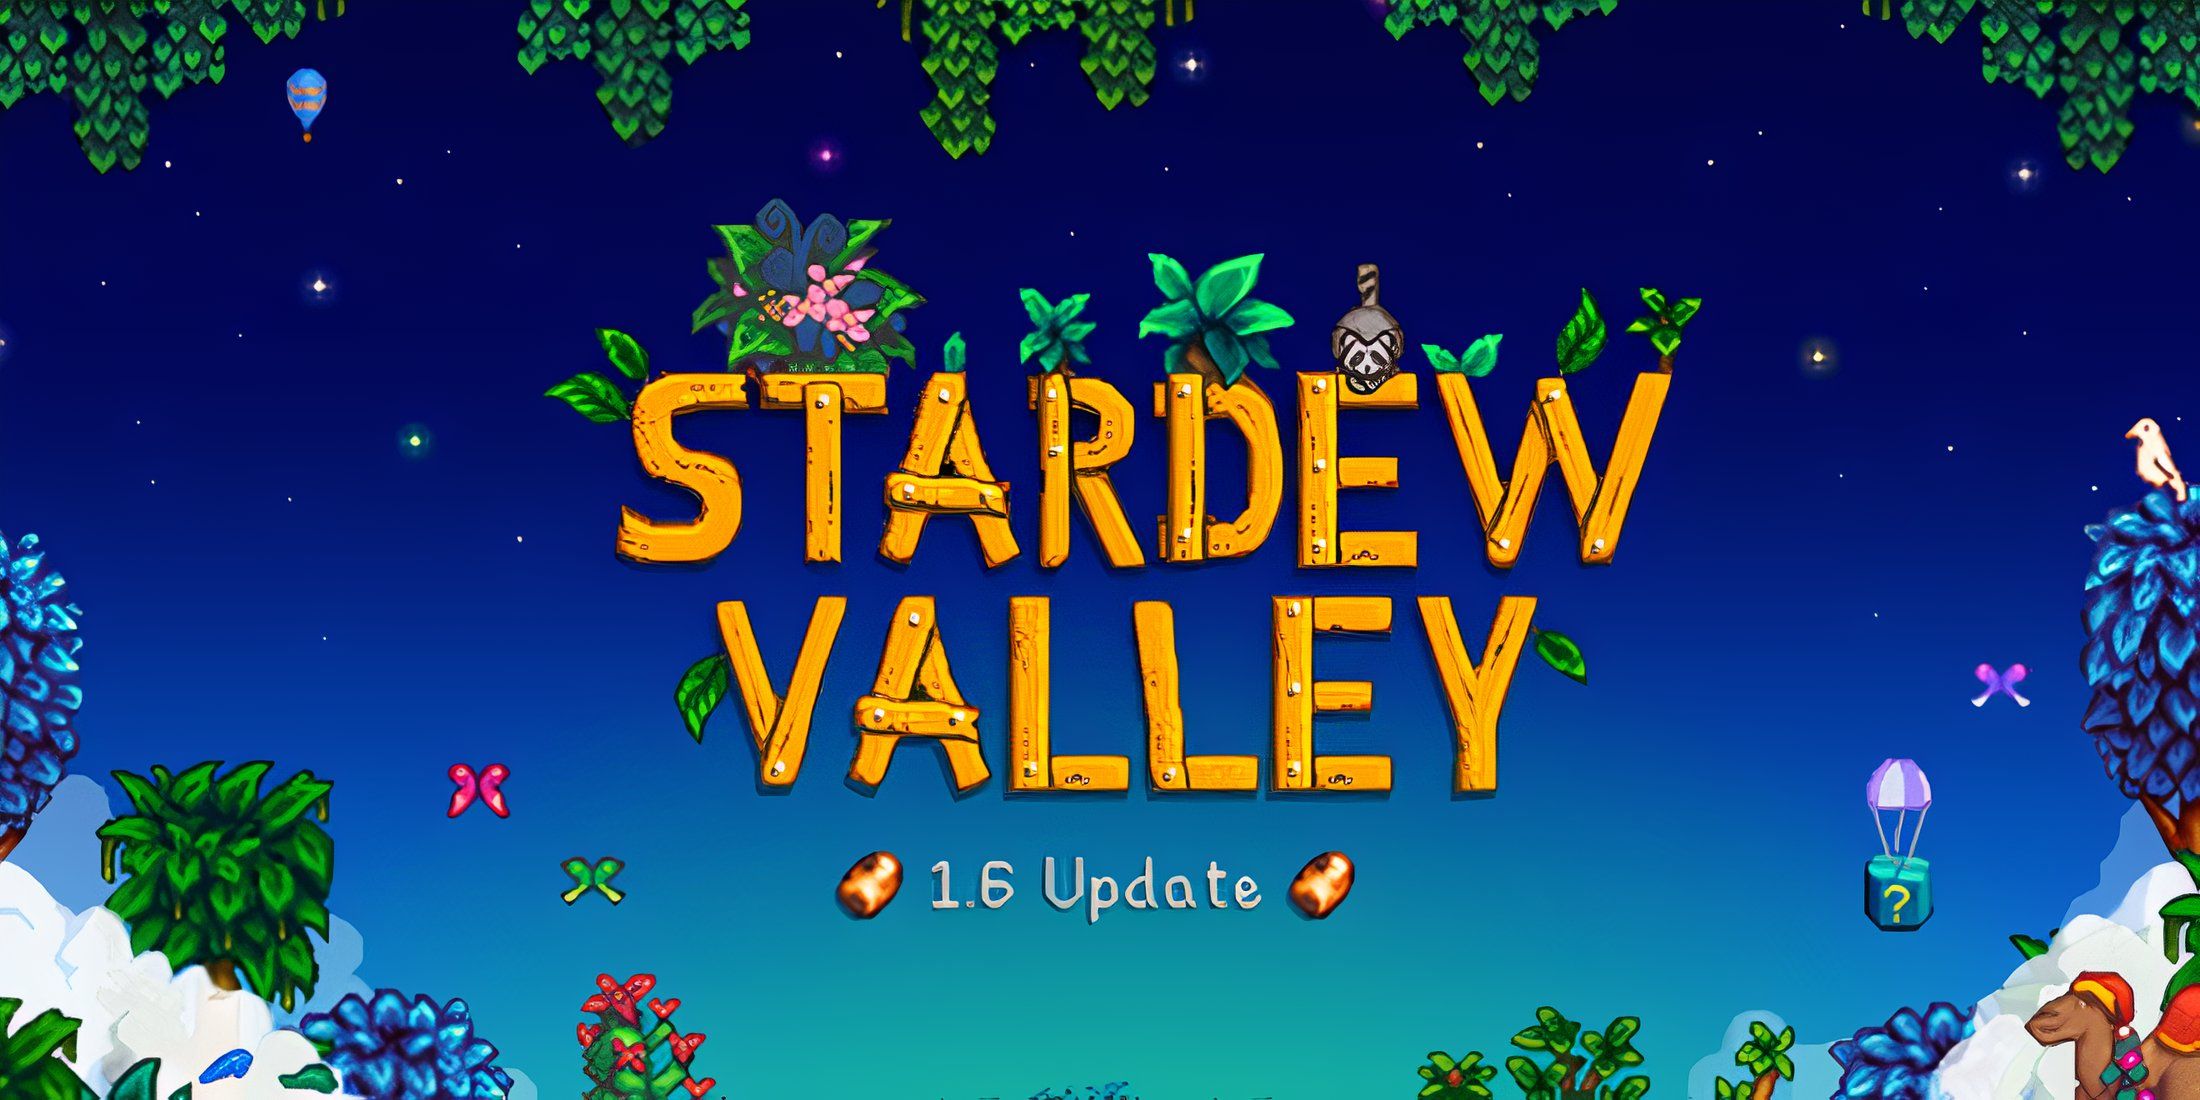 stardew-valley-1-6-update-mobile-console-concernedape